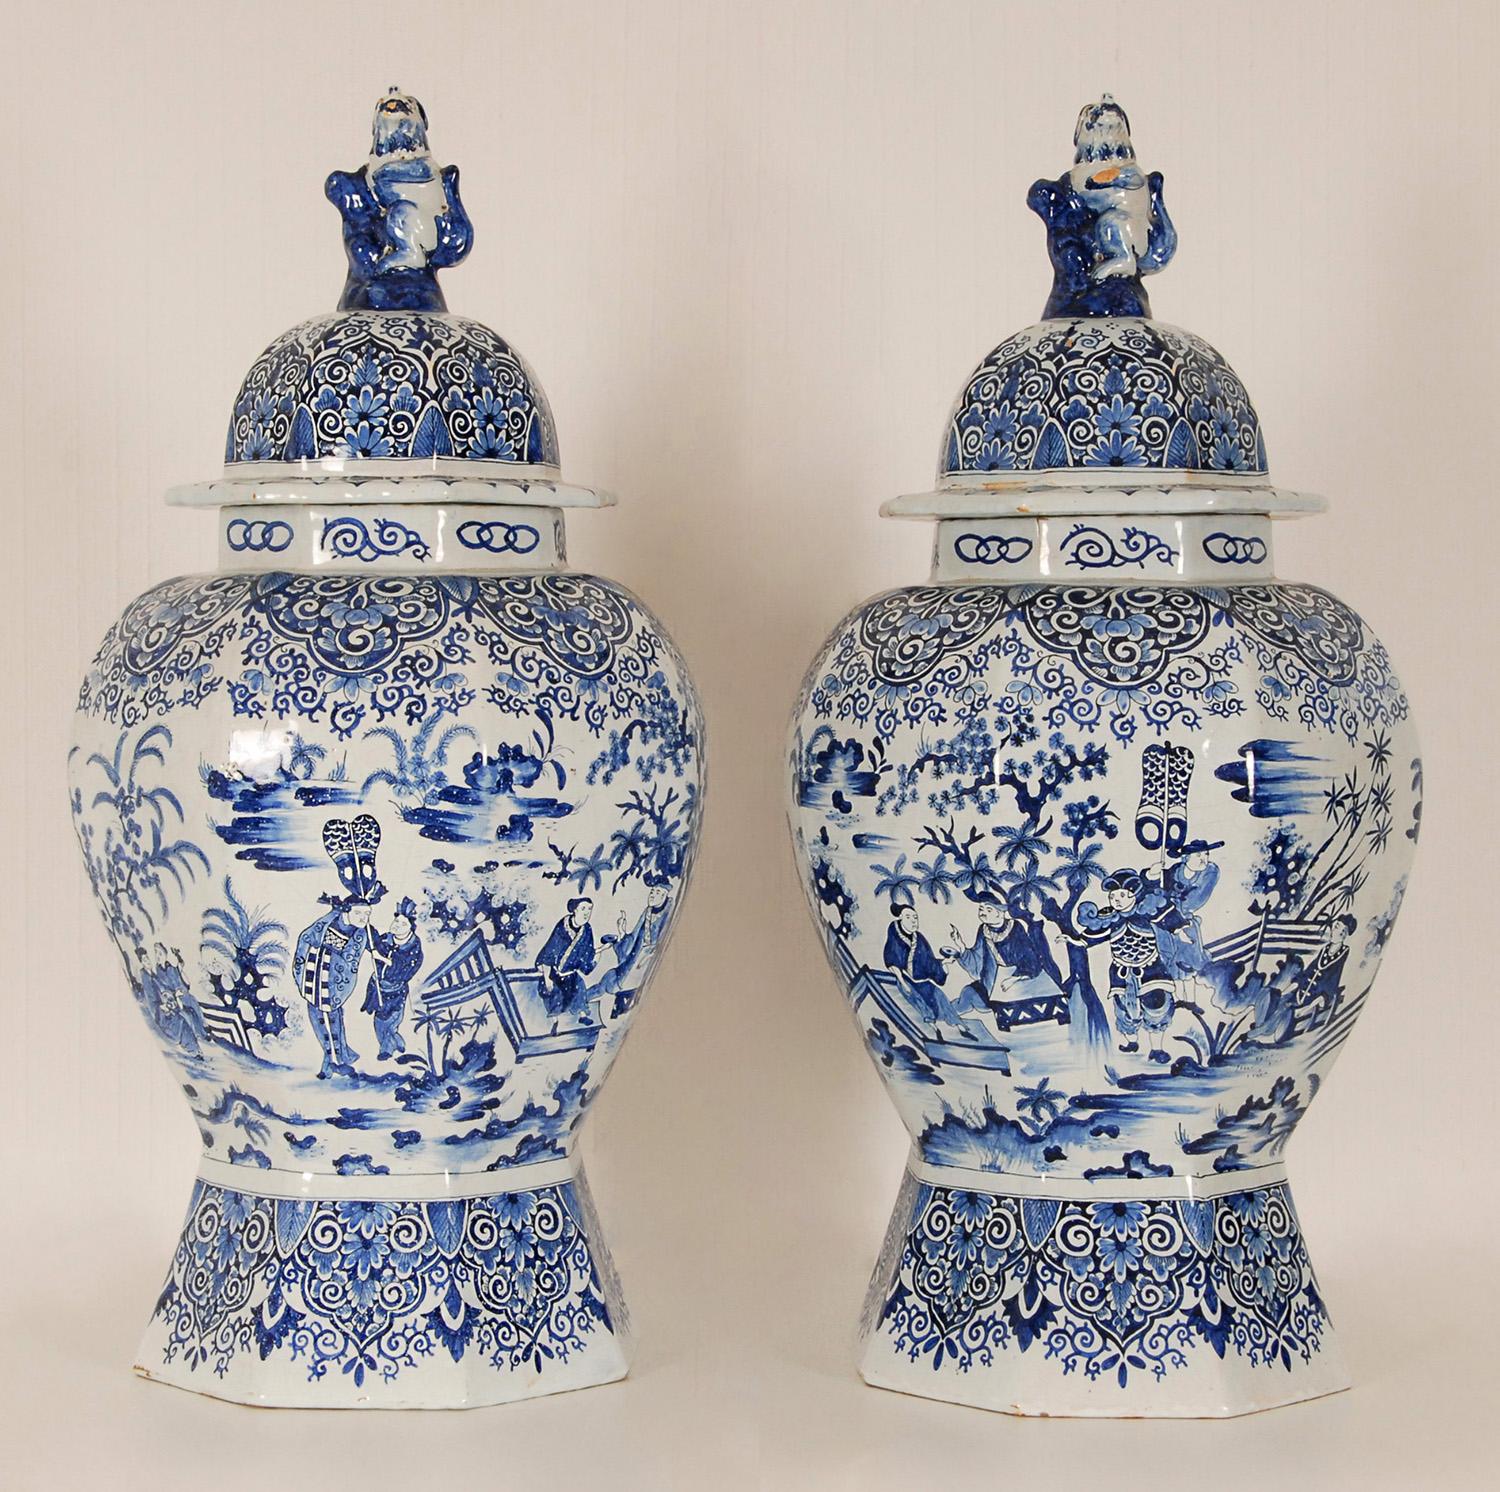 A pair tall antique Dutch Delft baluster vases with foo dog finial
Hand made and painted in the 17th century Dutch Delft style
Material: Delft earthenware, tin glaze
Design: Chinoiserie in the manner of, Chinese Transition style, Chinese Kangxi